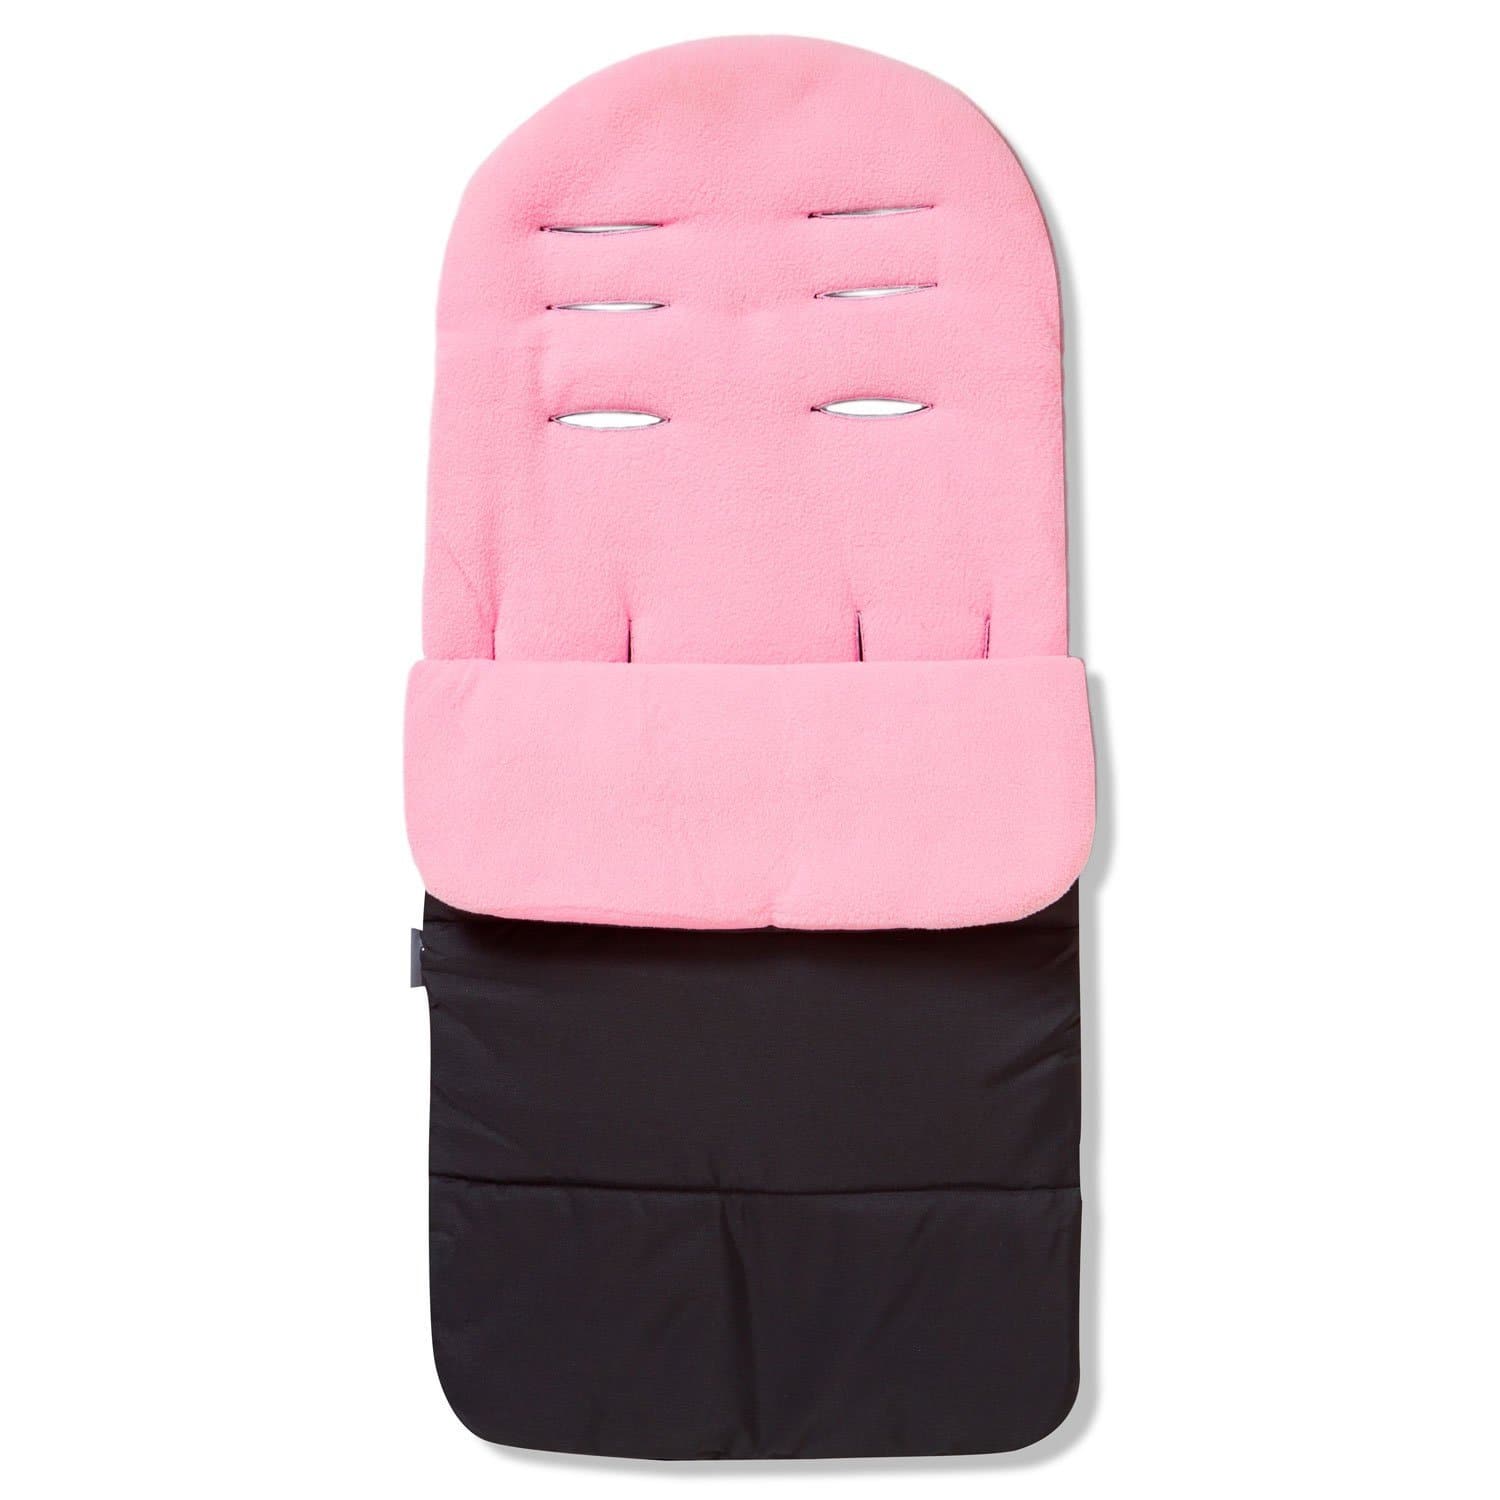 Premium Footmuff / Cosy Toes Compatible with BabyDan - Candy Pink / Fits All Models | For Your Little One